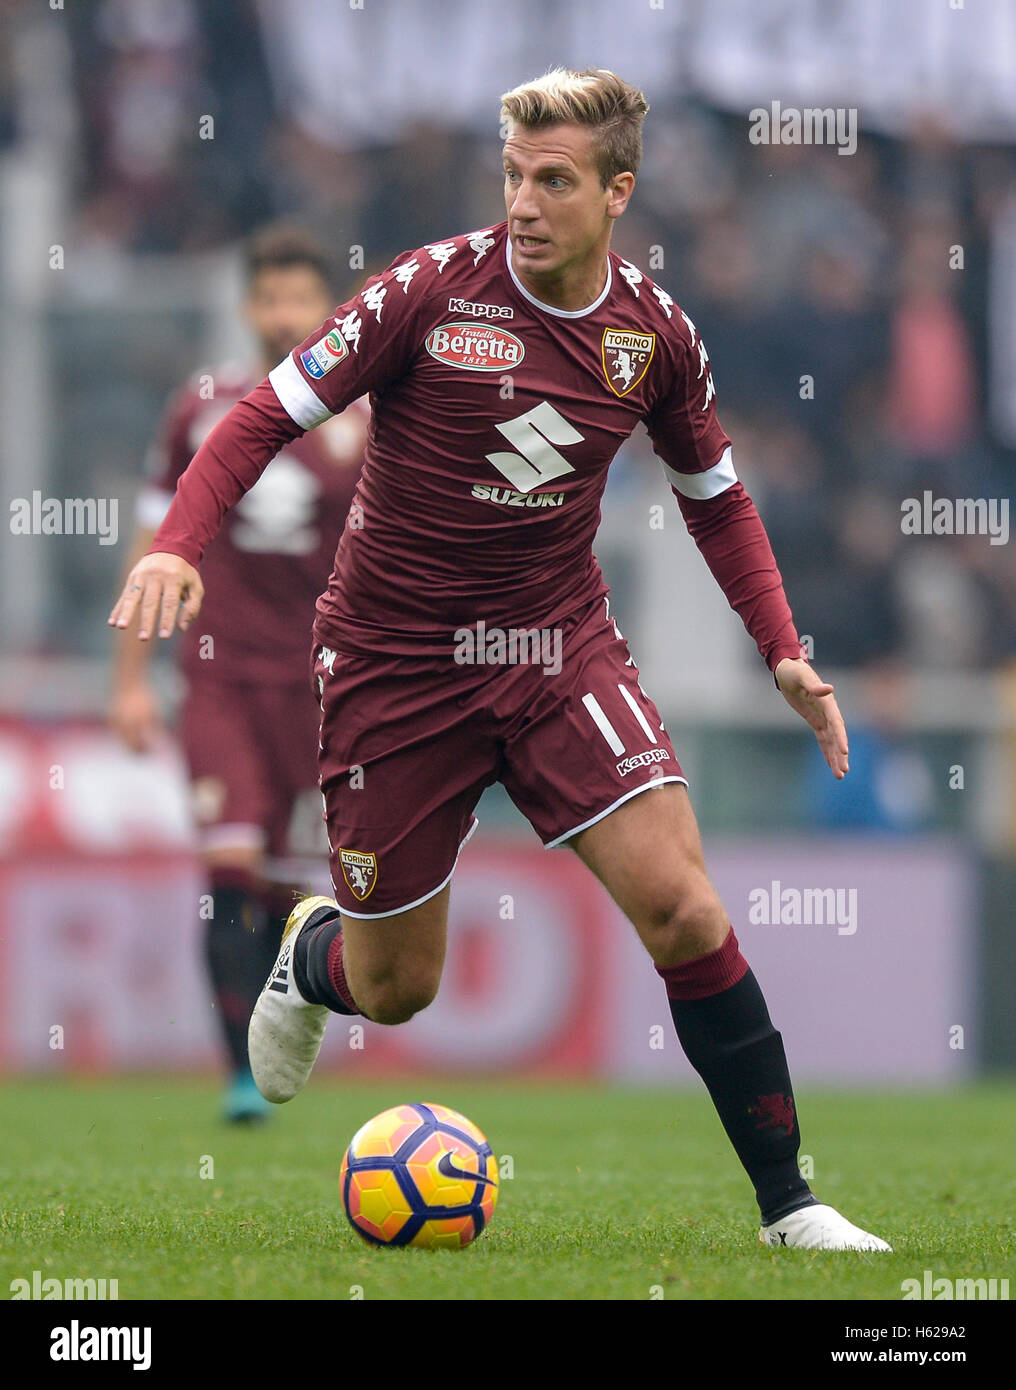 Turin, Italy. 23rd Oct, 2016. Maxi Lopez of Torino FC in action during the Serie A football match between Torino FC and SS Lazio. The final result was 2-2 © Nicolo Campo/Pacific Press/Alamy Live News Stock Photo